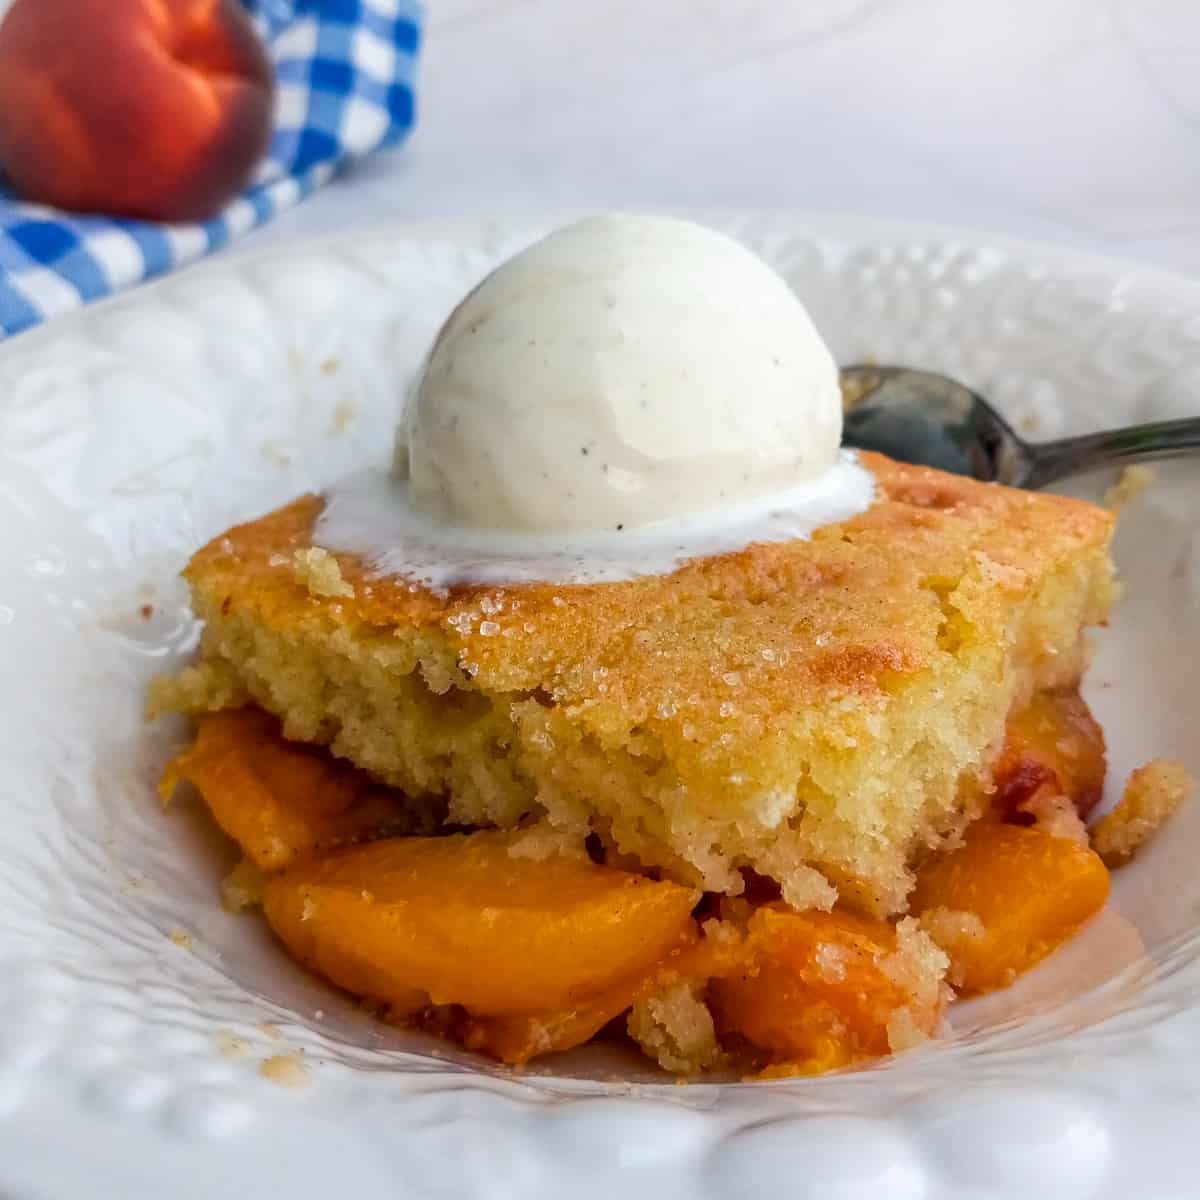 Amish peach cobbler in a dish topped with a scoop of ice cream